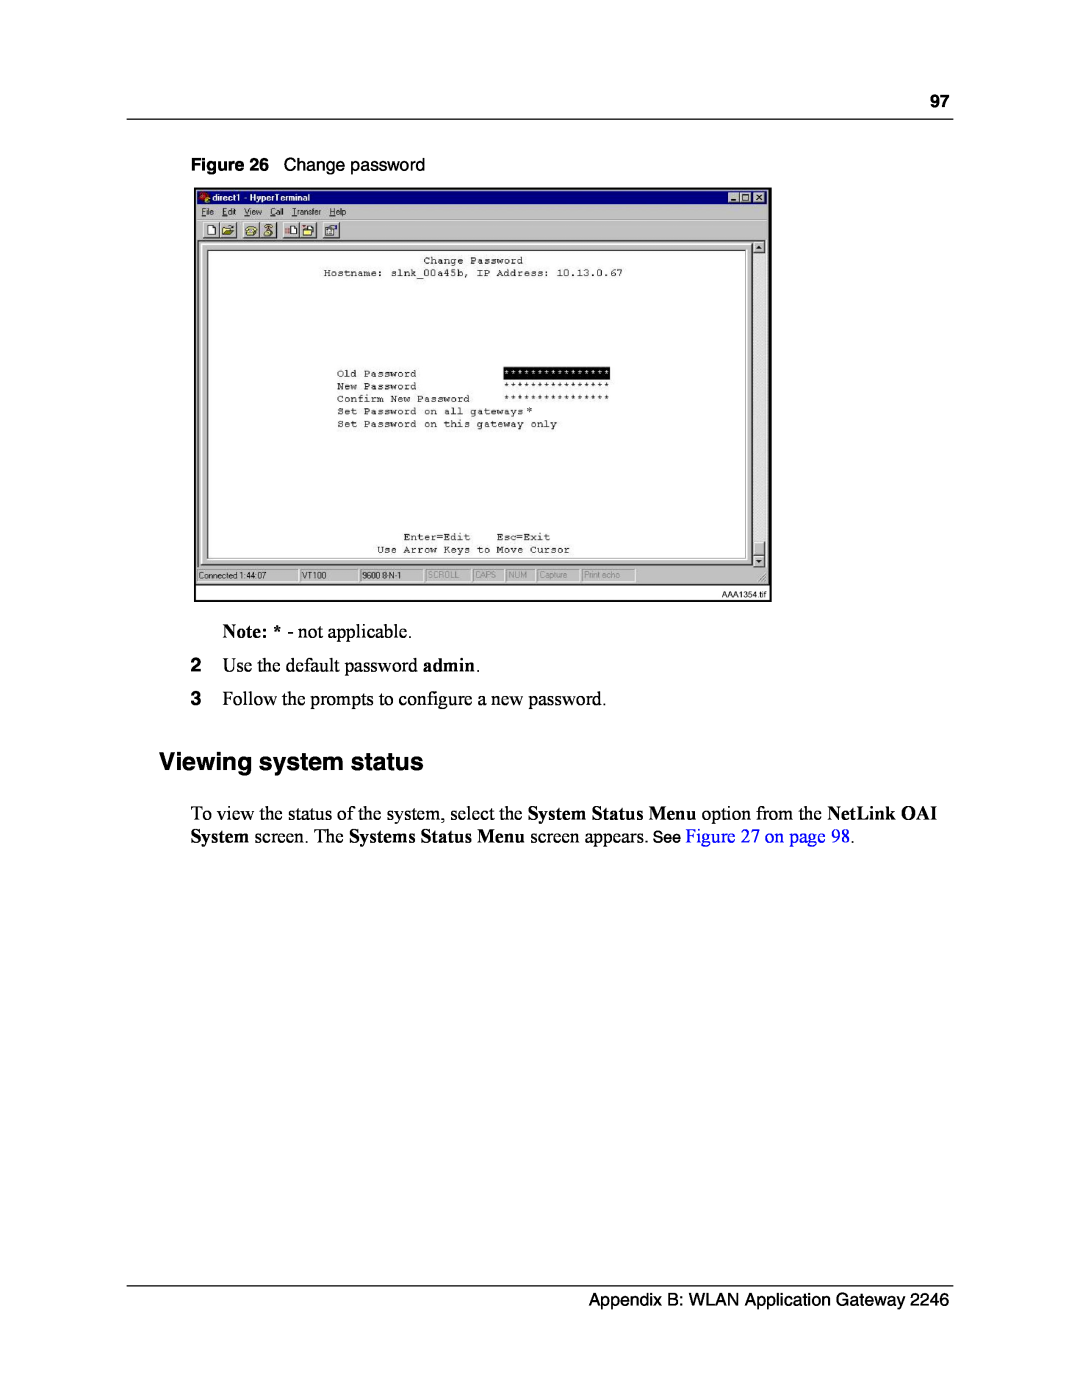 Nortel Networks MOG6xx Viewing system status, Note * - not applicable 2 Use the default password admin, Change password 